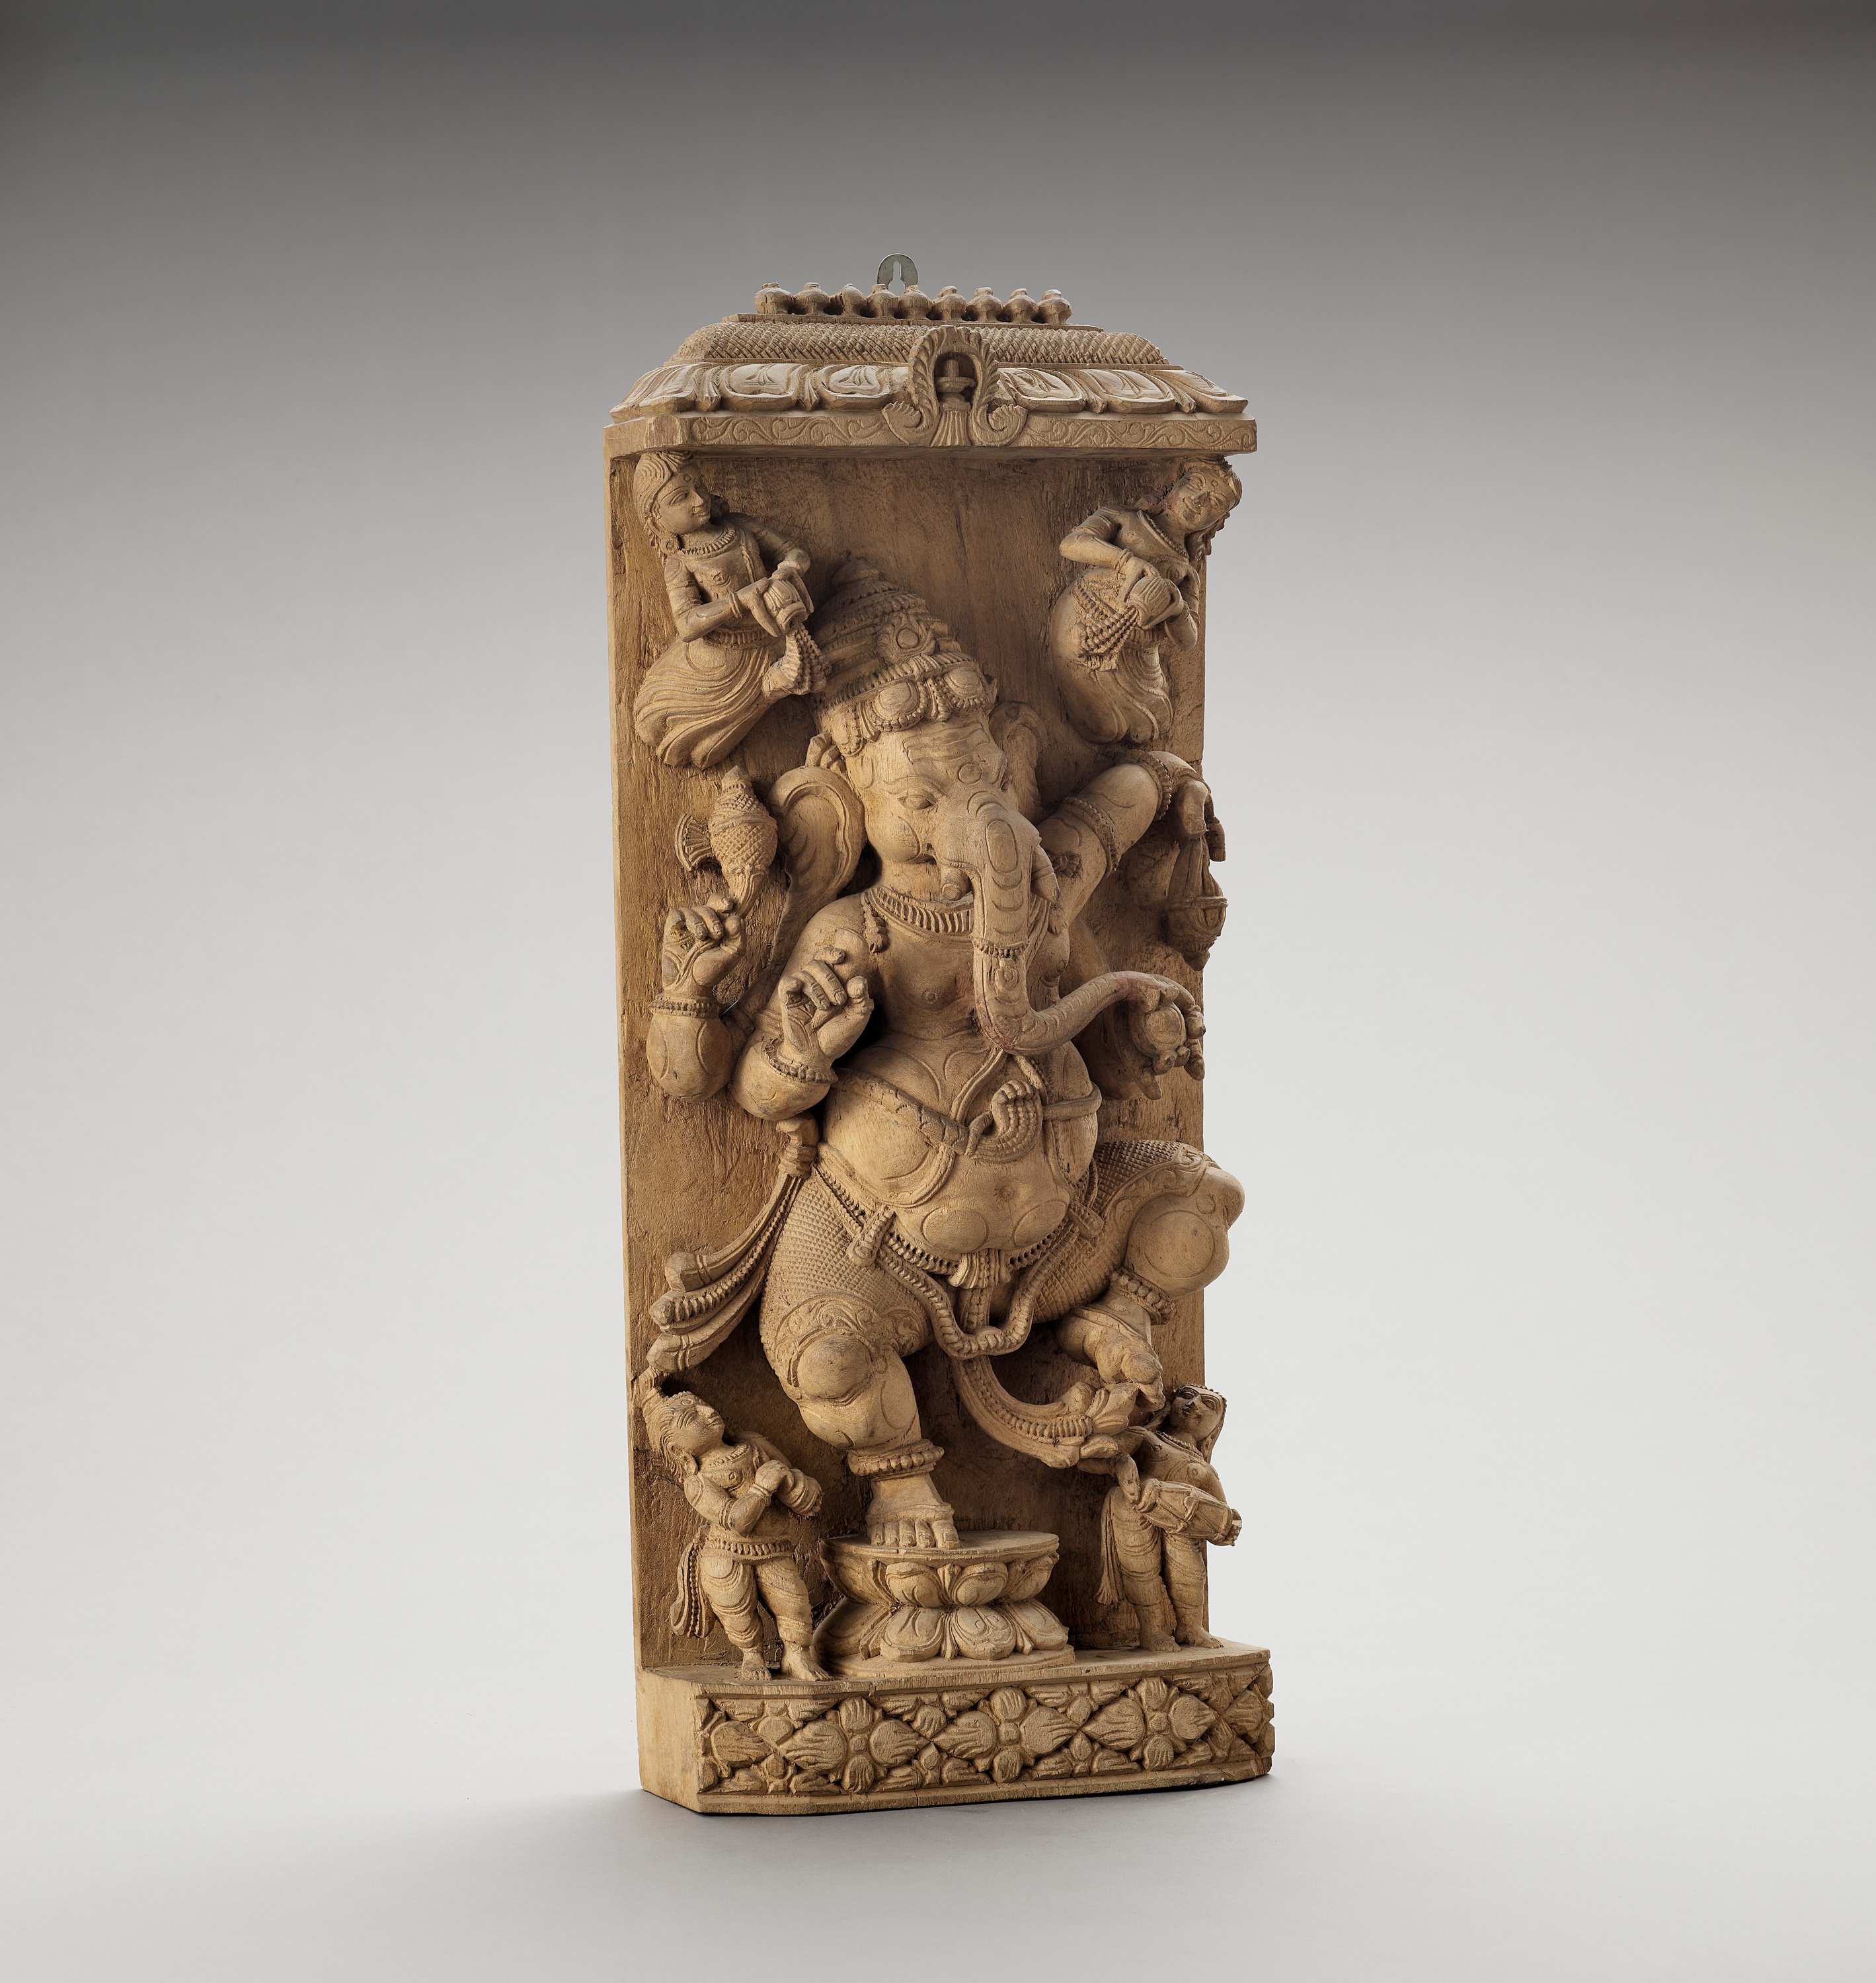 A CARVED WOOD STELE WITH GANESHA, 20TH CENTURY - Image 3 of 6